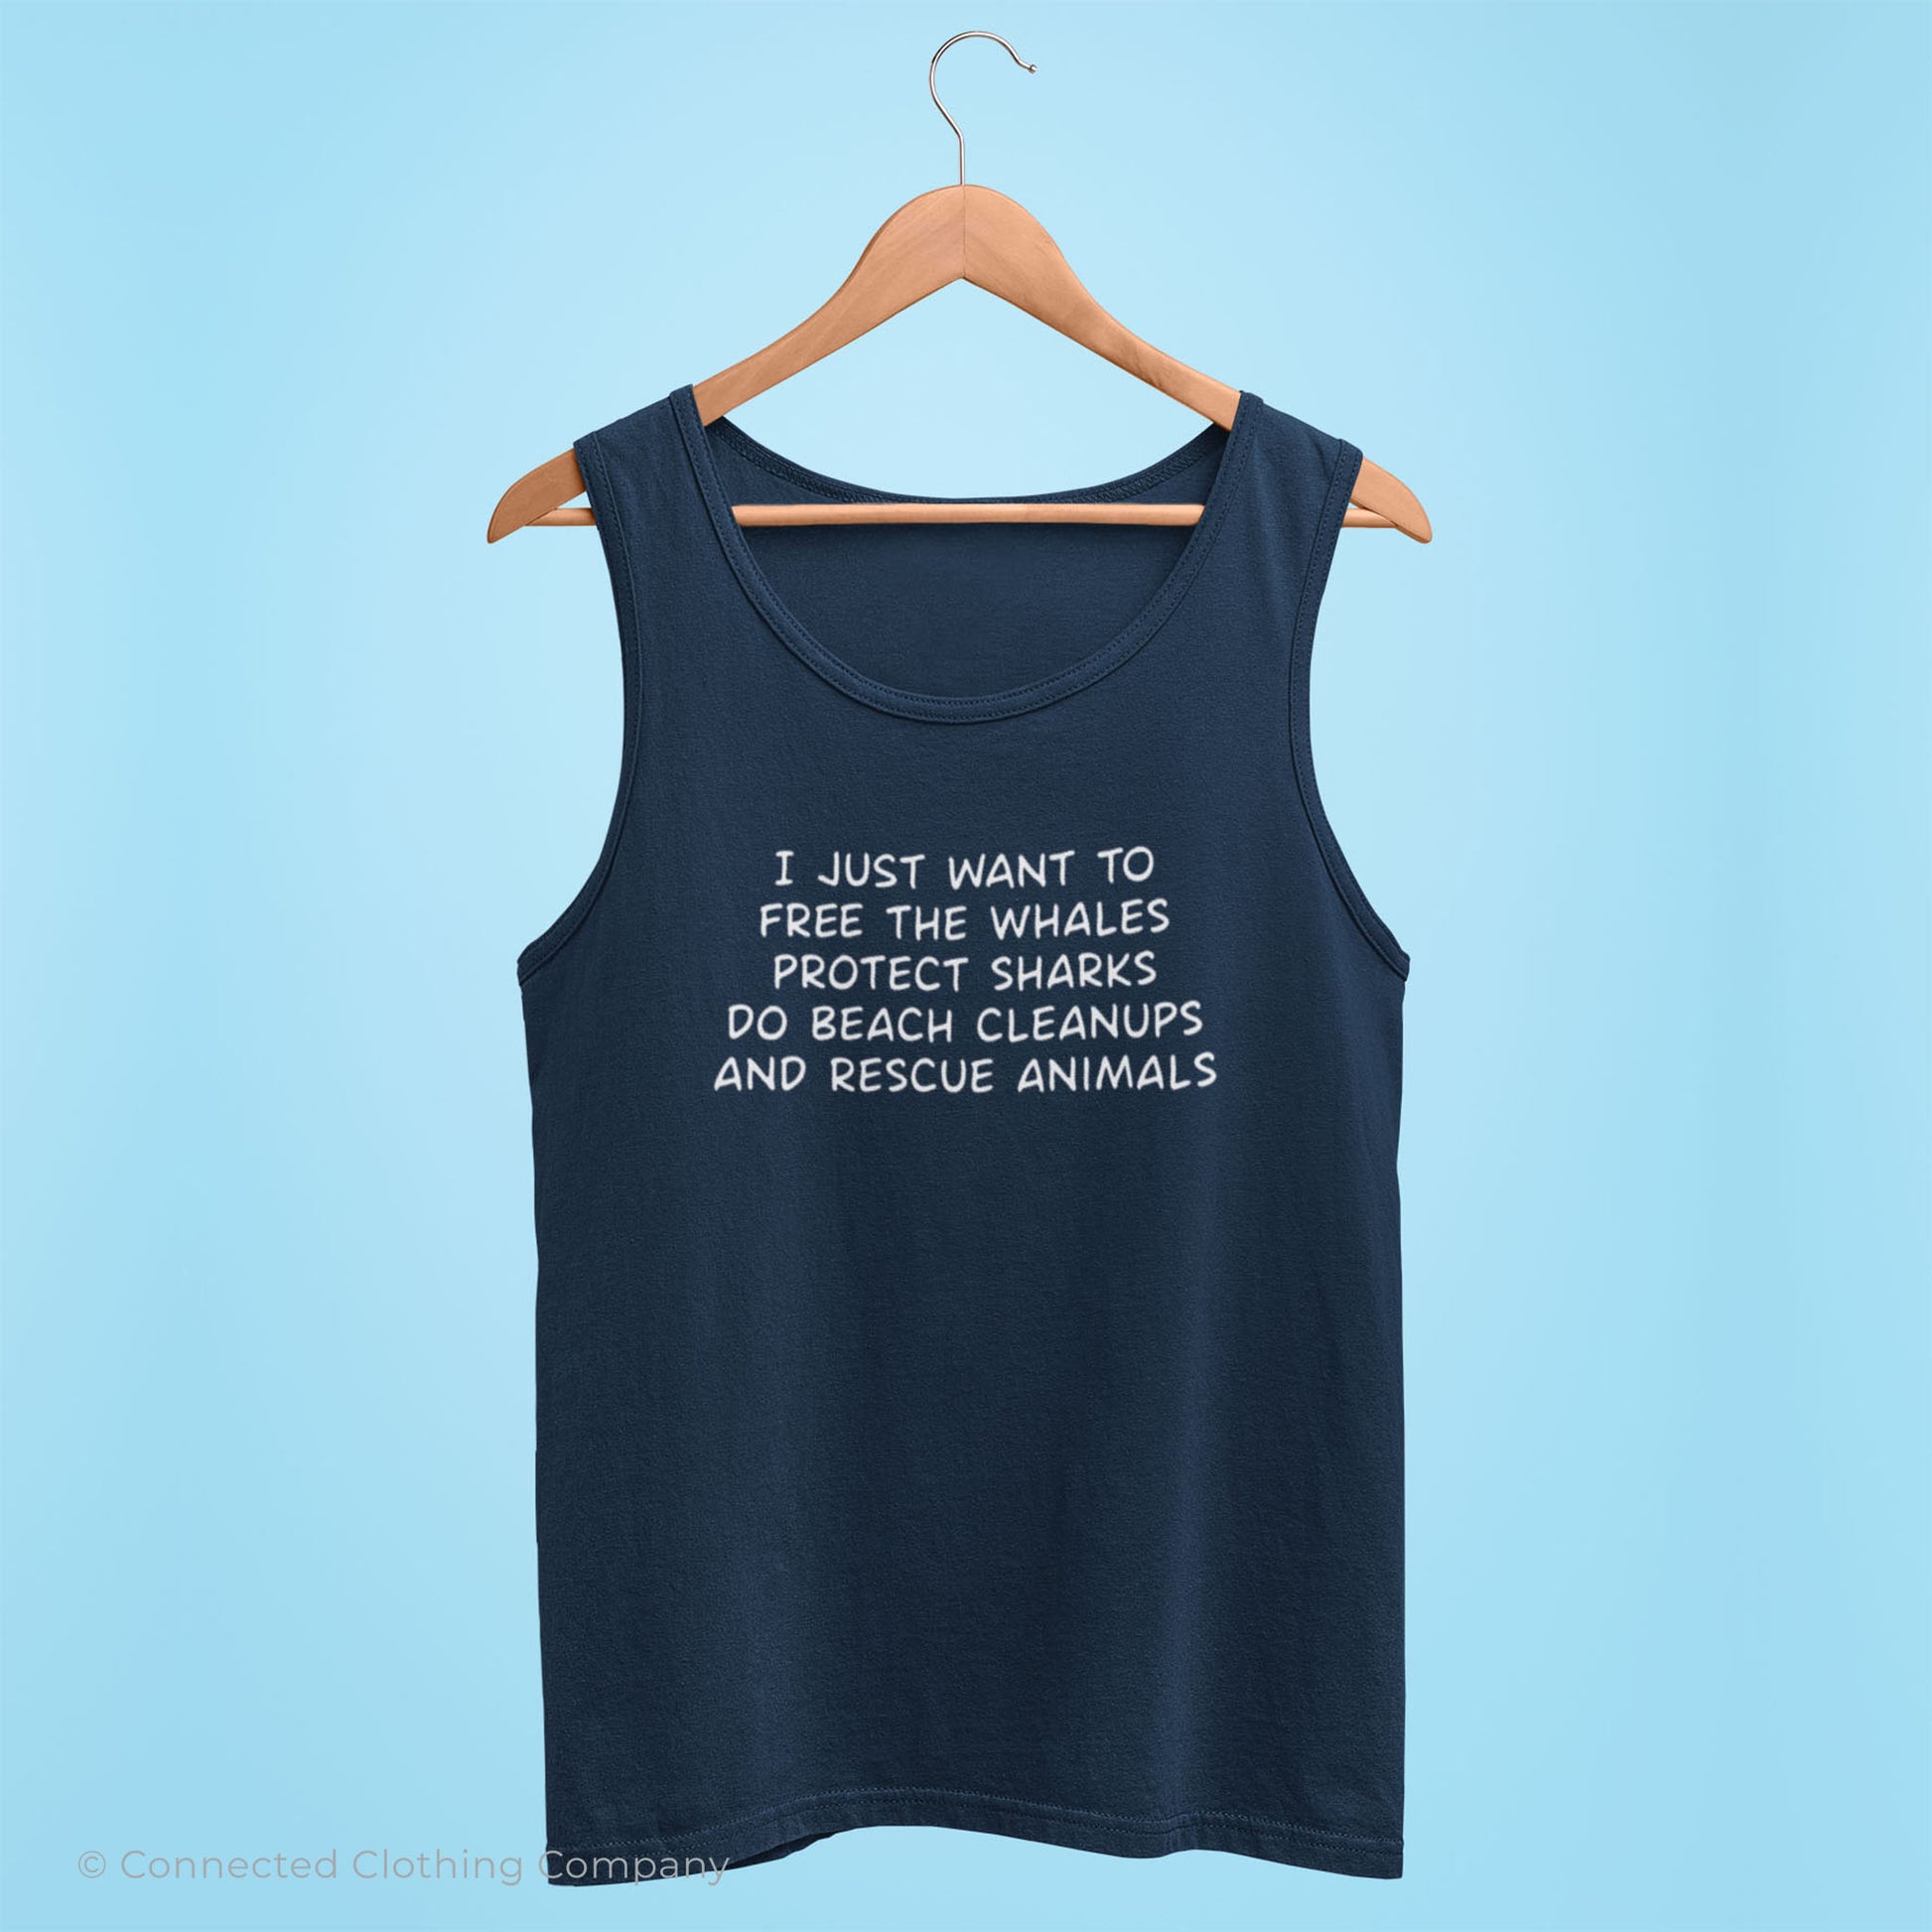 Navy Blue I Just Want To Save The World Tank Top reads "I just want to free the whales, protect sharks, do beach cleanups, and rescue animals." - Connected Clothing Company - Ethically and Sustainably Made - 10% donated to Mission Blue ocean conservation